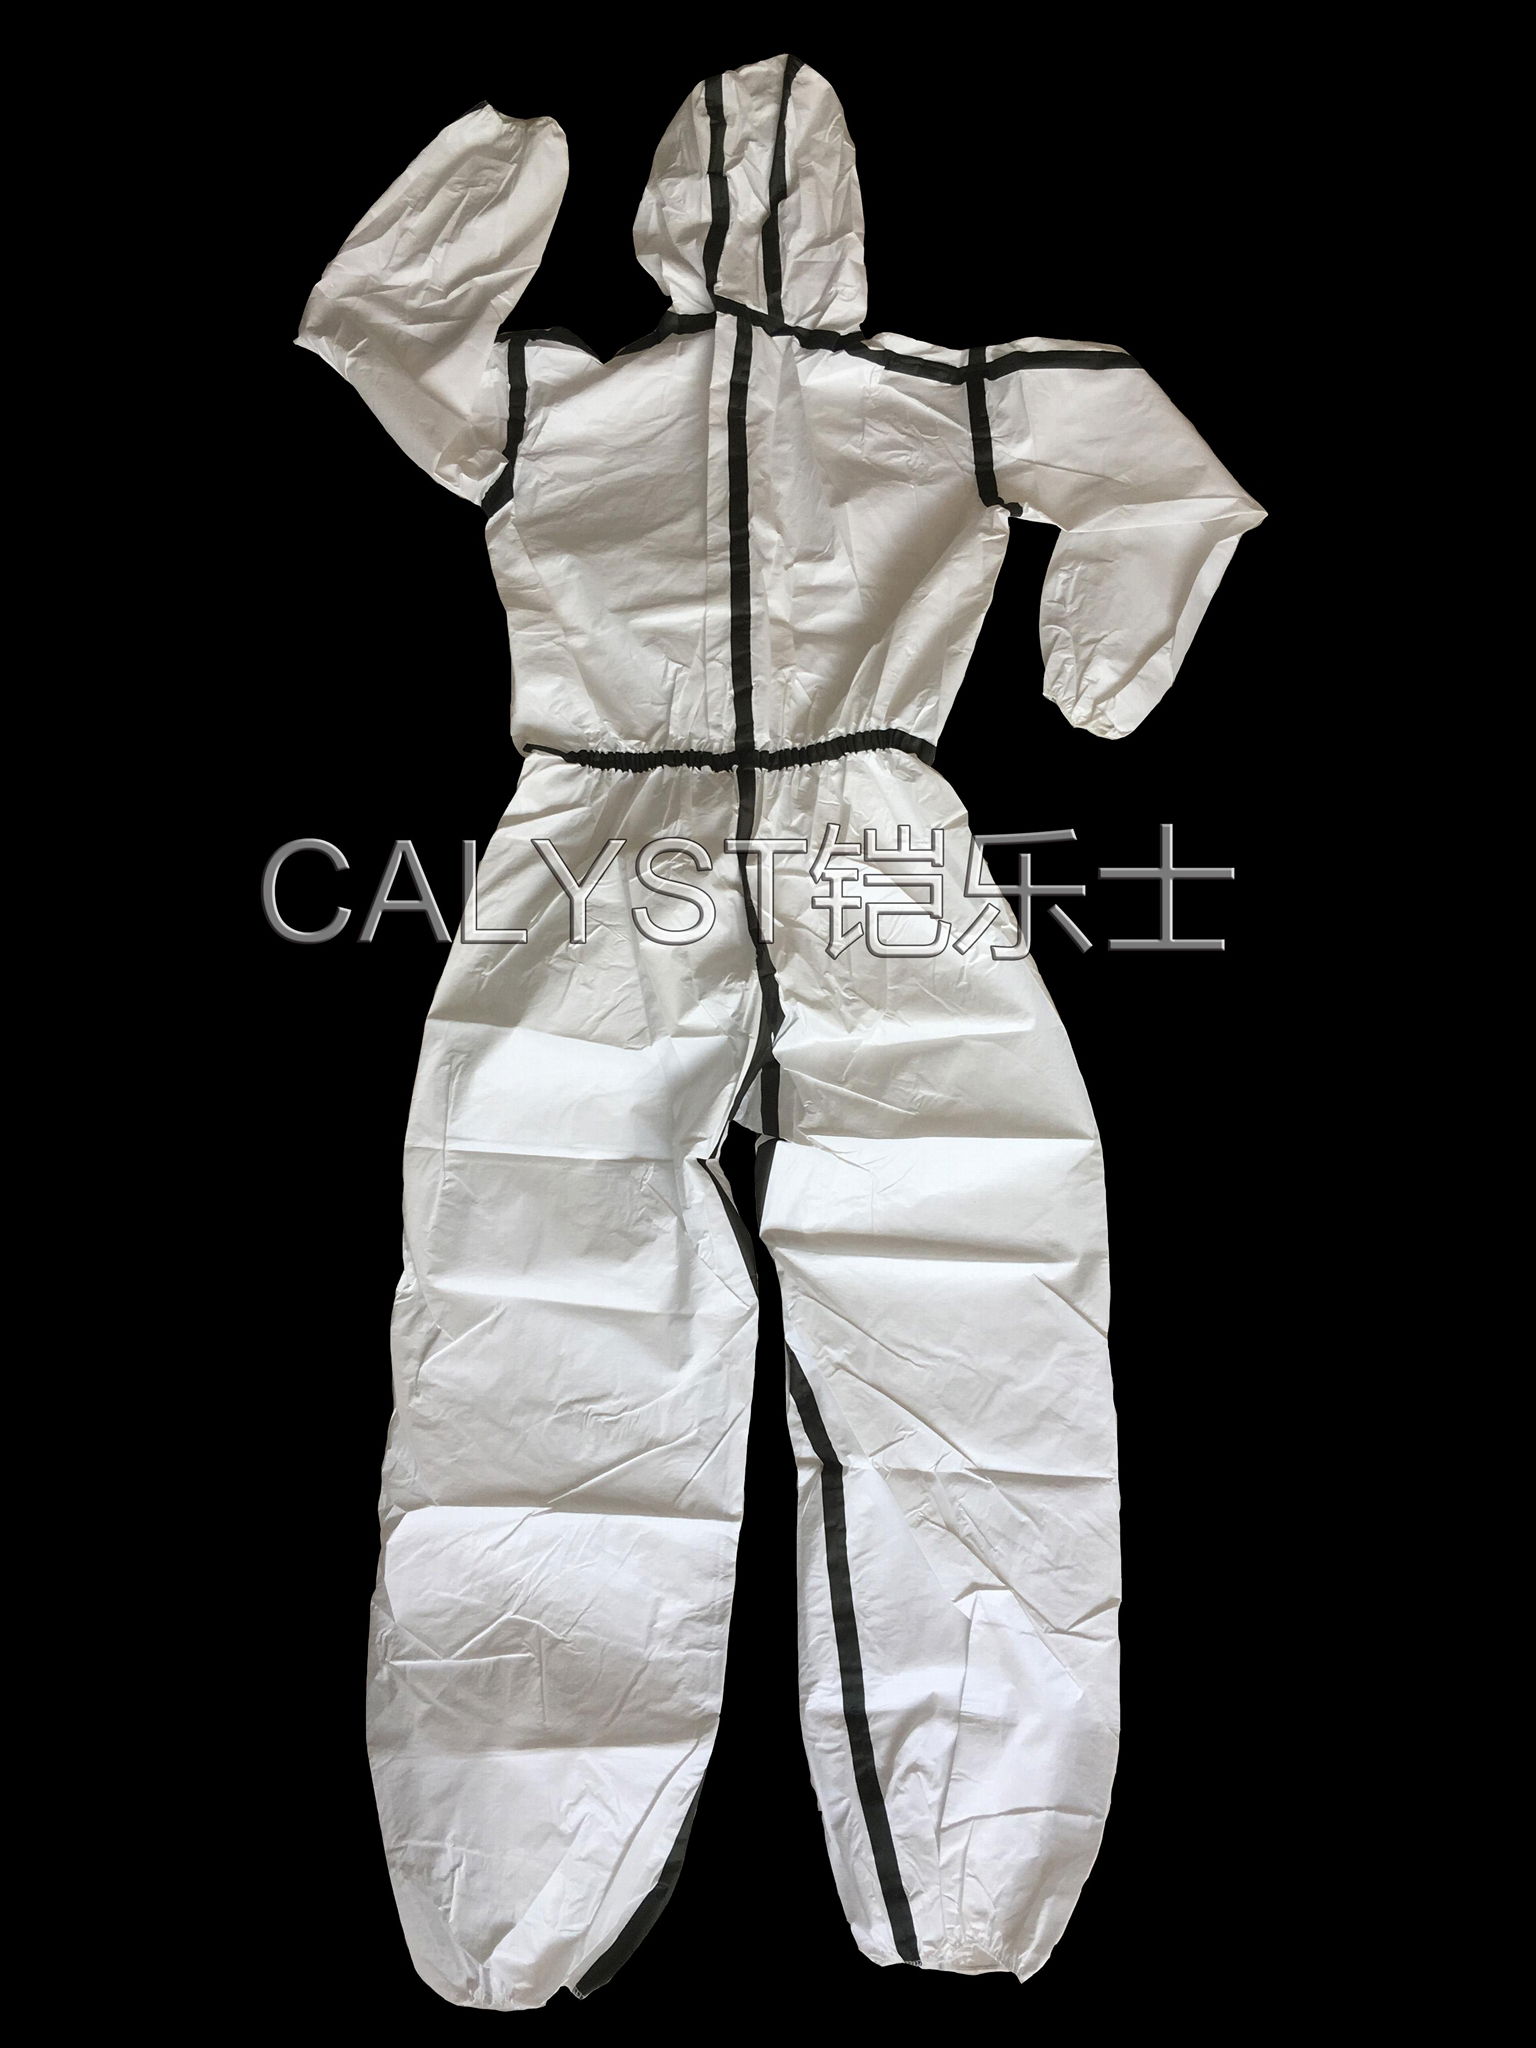 CALYST CA2000T SF NOWEN protective clothing MICROPOROUS FILM 5